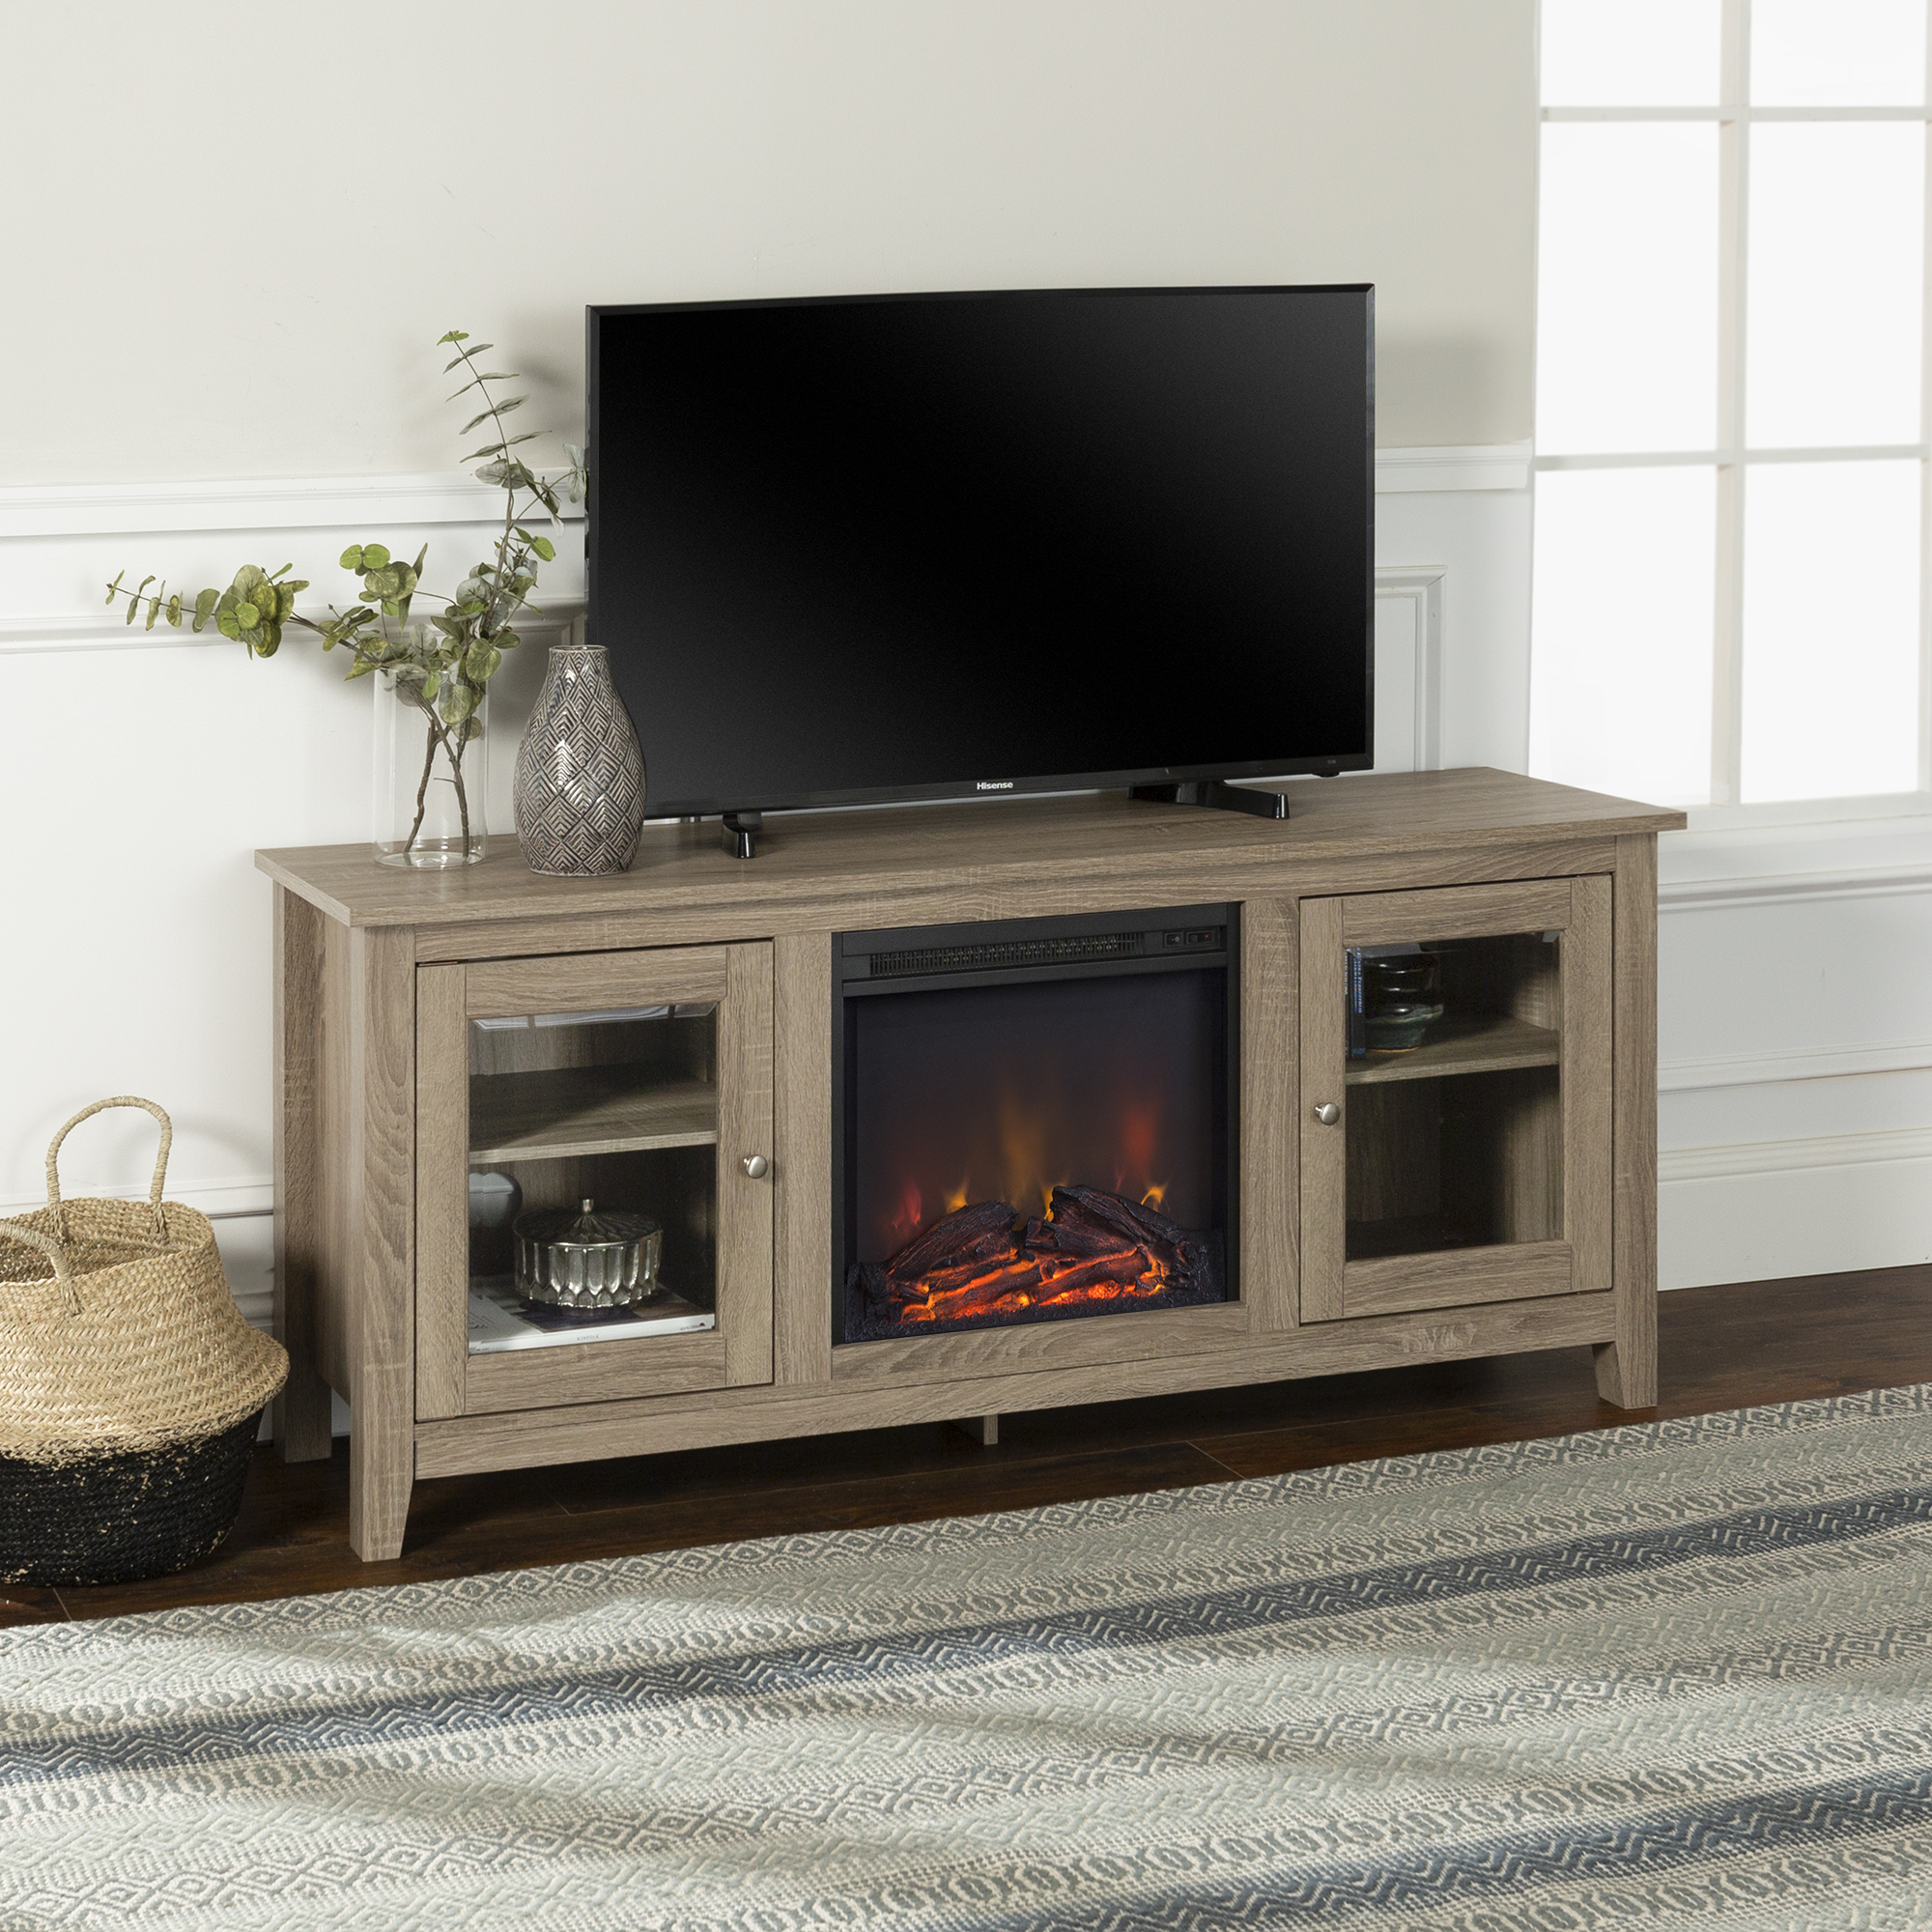 Walker Edison Driftwood Fireplace TV Stand for TVs up to 60" - image 1 of 9